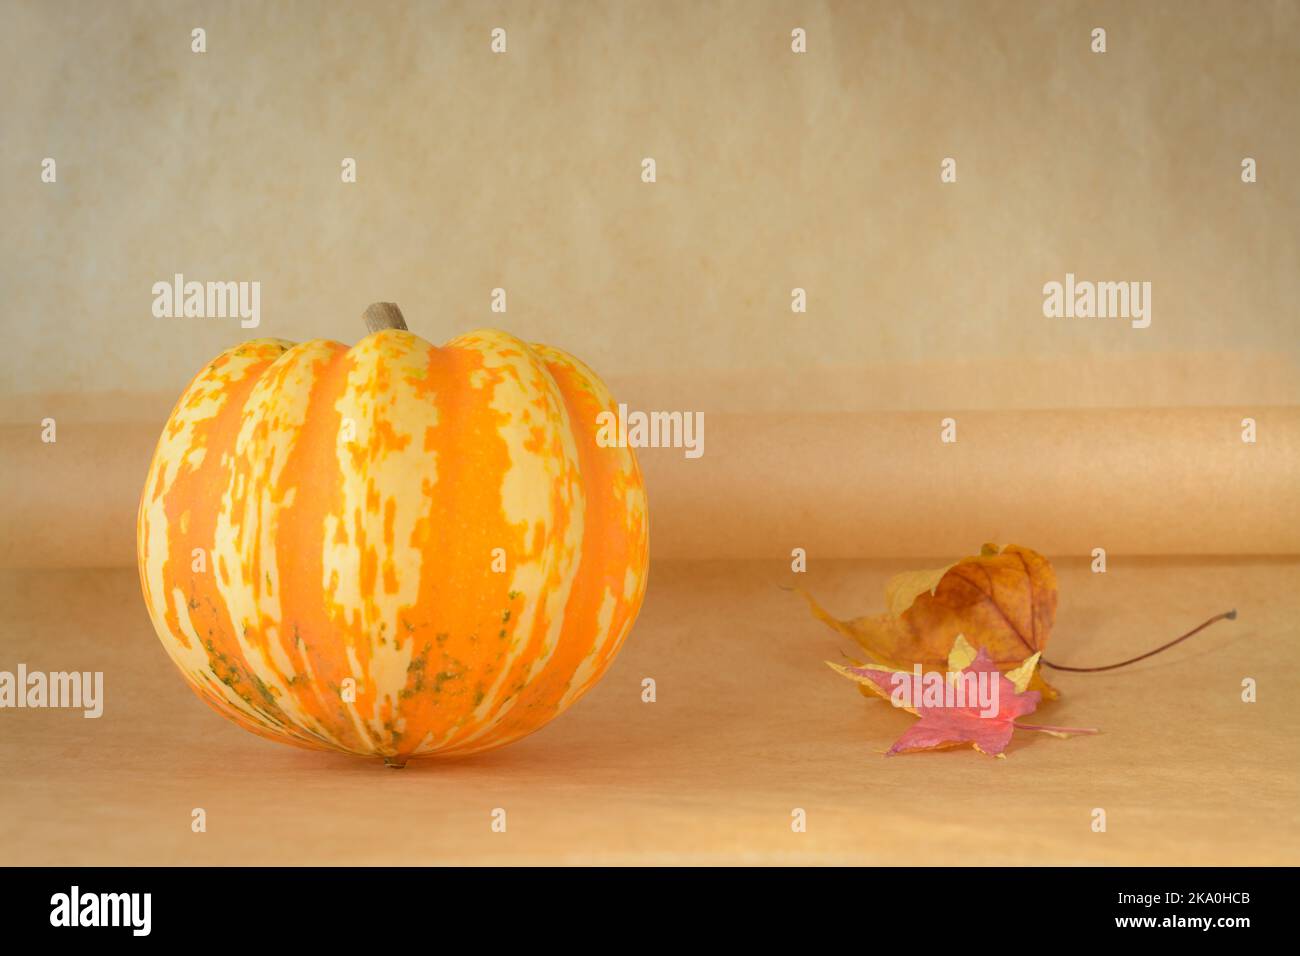 Small deuorative pumpkin with spots on a beige background in a horizontal format Stock Photo